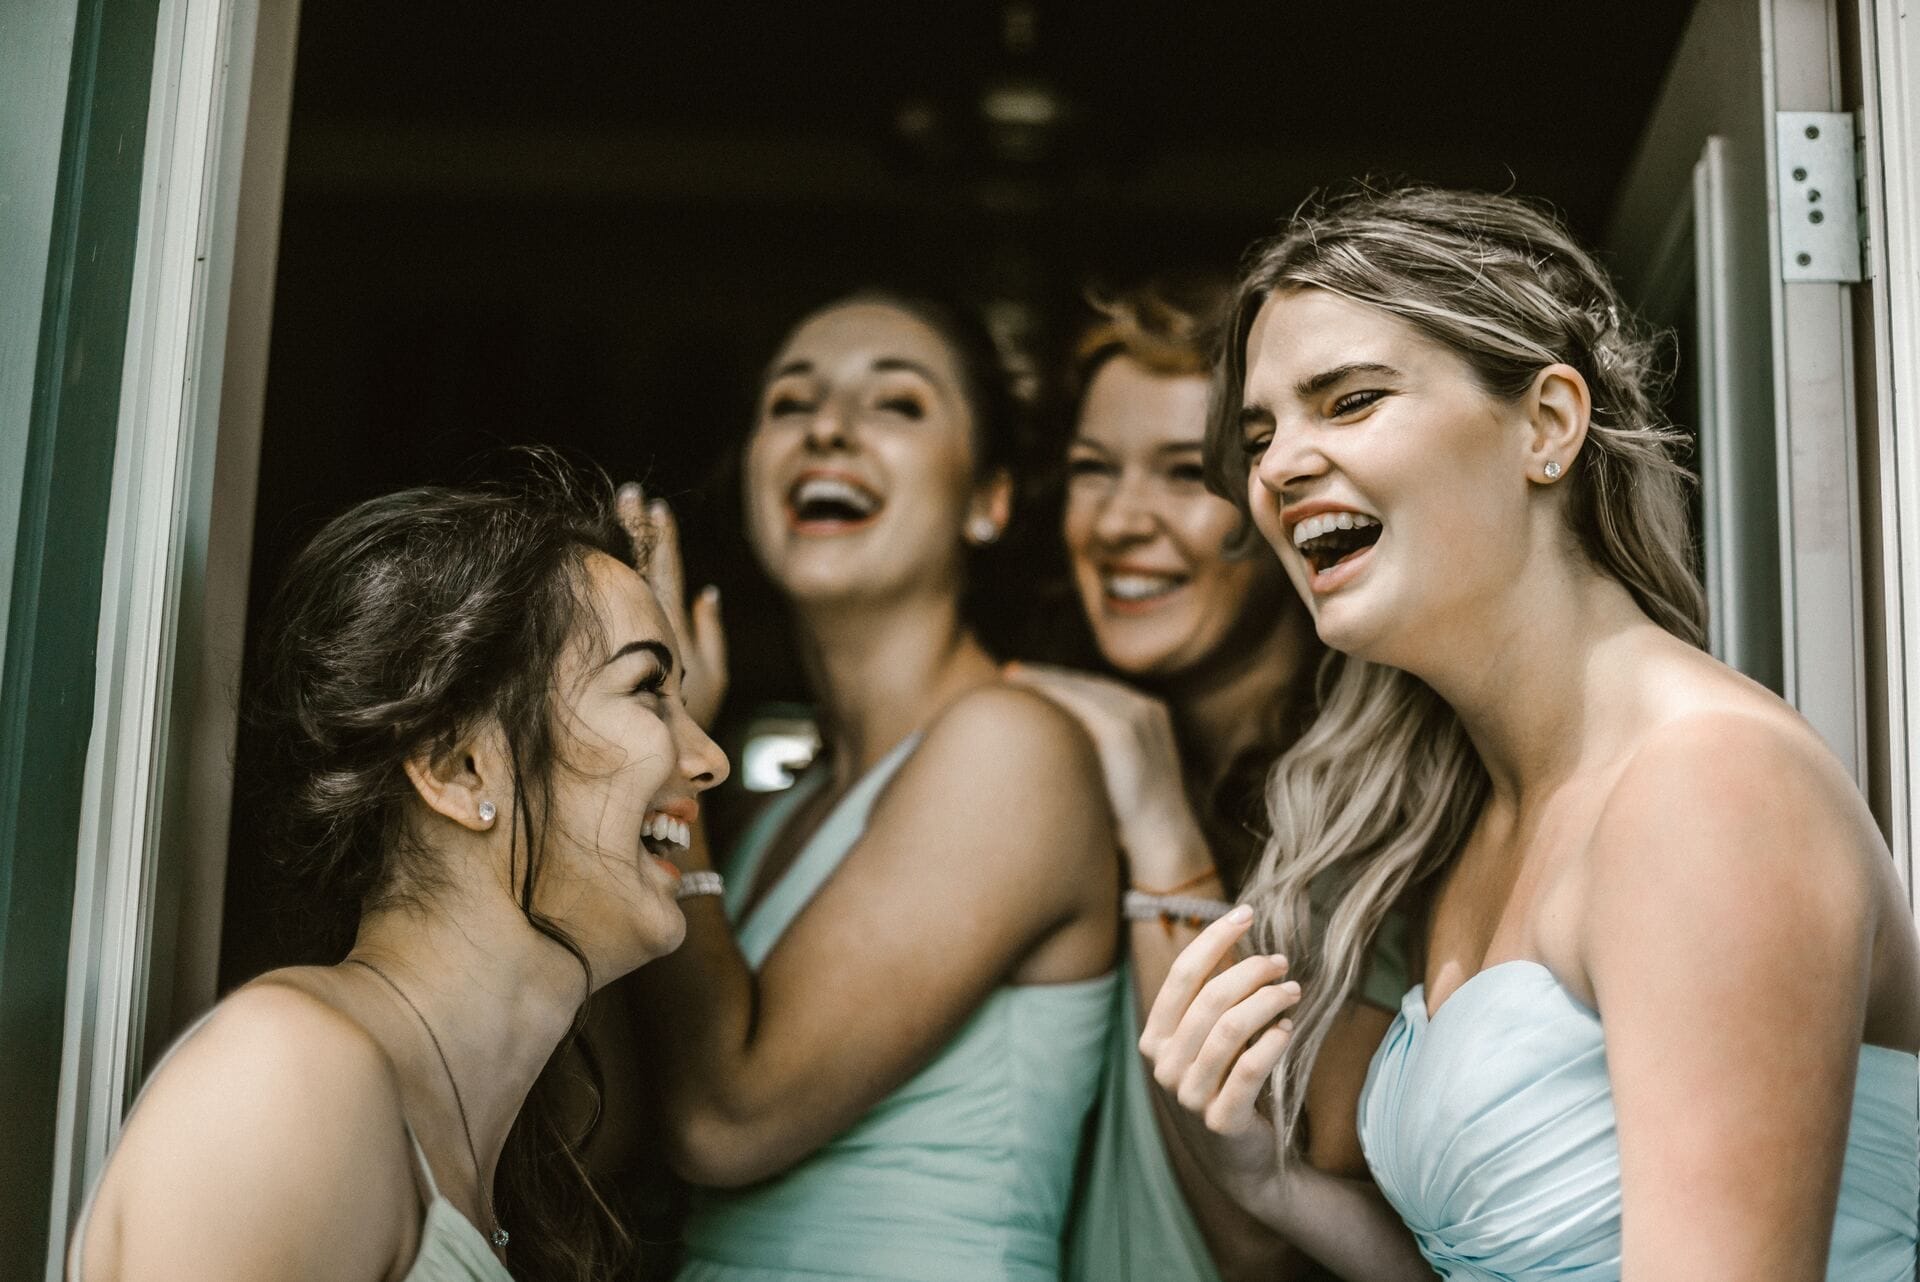 Who are the Bridesmaids / Honor Attendants?